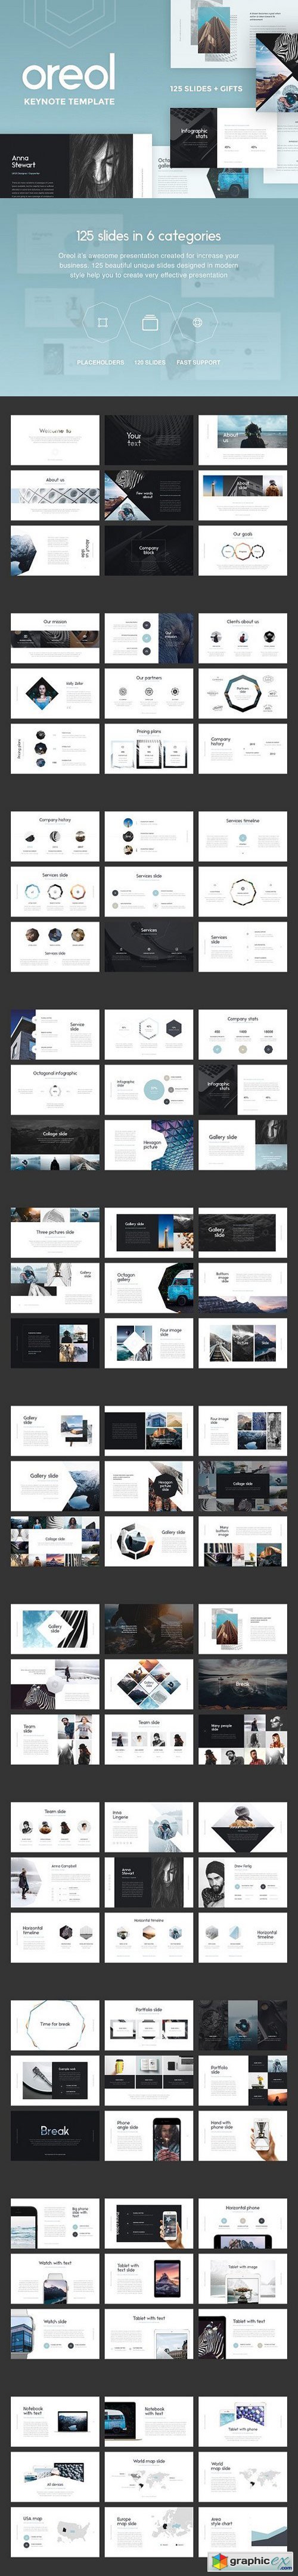 Oreol Keynote Template + GIFTS